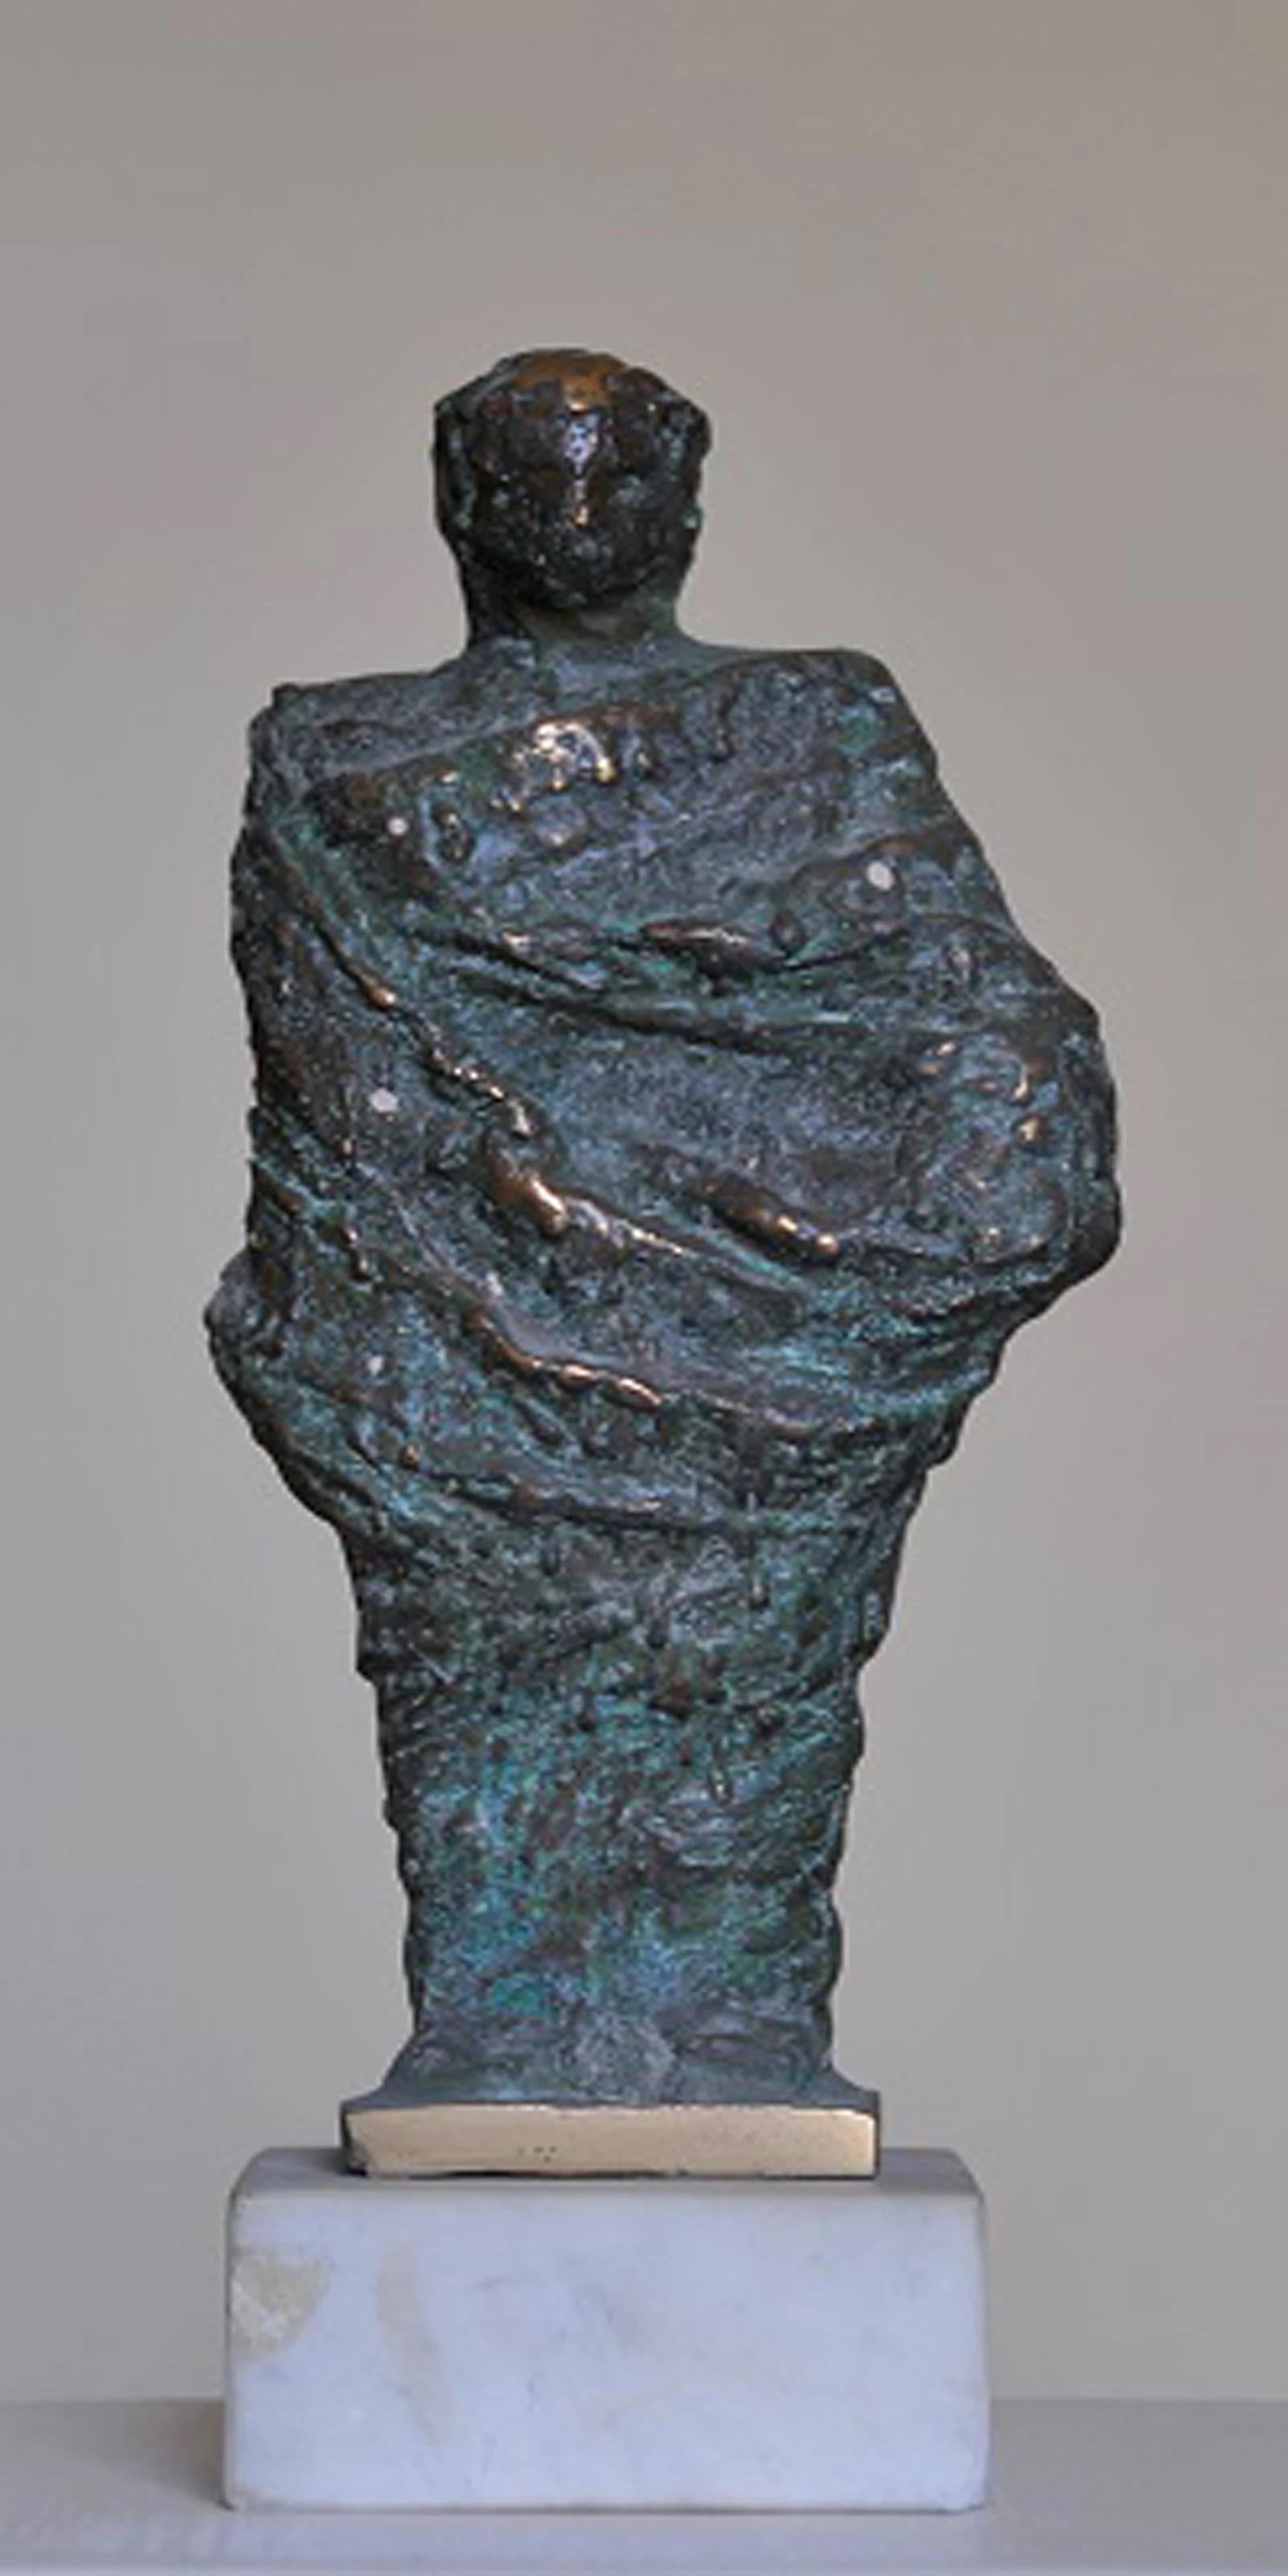 "Robed III" Bronze Sculpture 9.5" x 4" x 3" inch by Sarkis Tossonian

Sarkis Tossoonian was born in Alexandria in 1953. He graduated from the Faculty of Fine Arts/Sculpture in 1979. He started exhibiting in individual and group exhibitions in